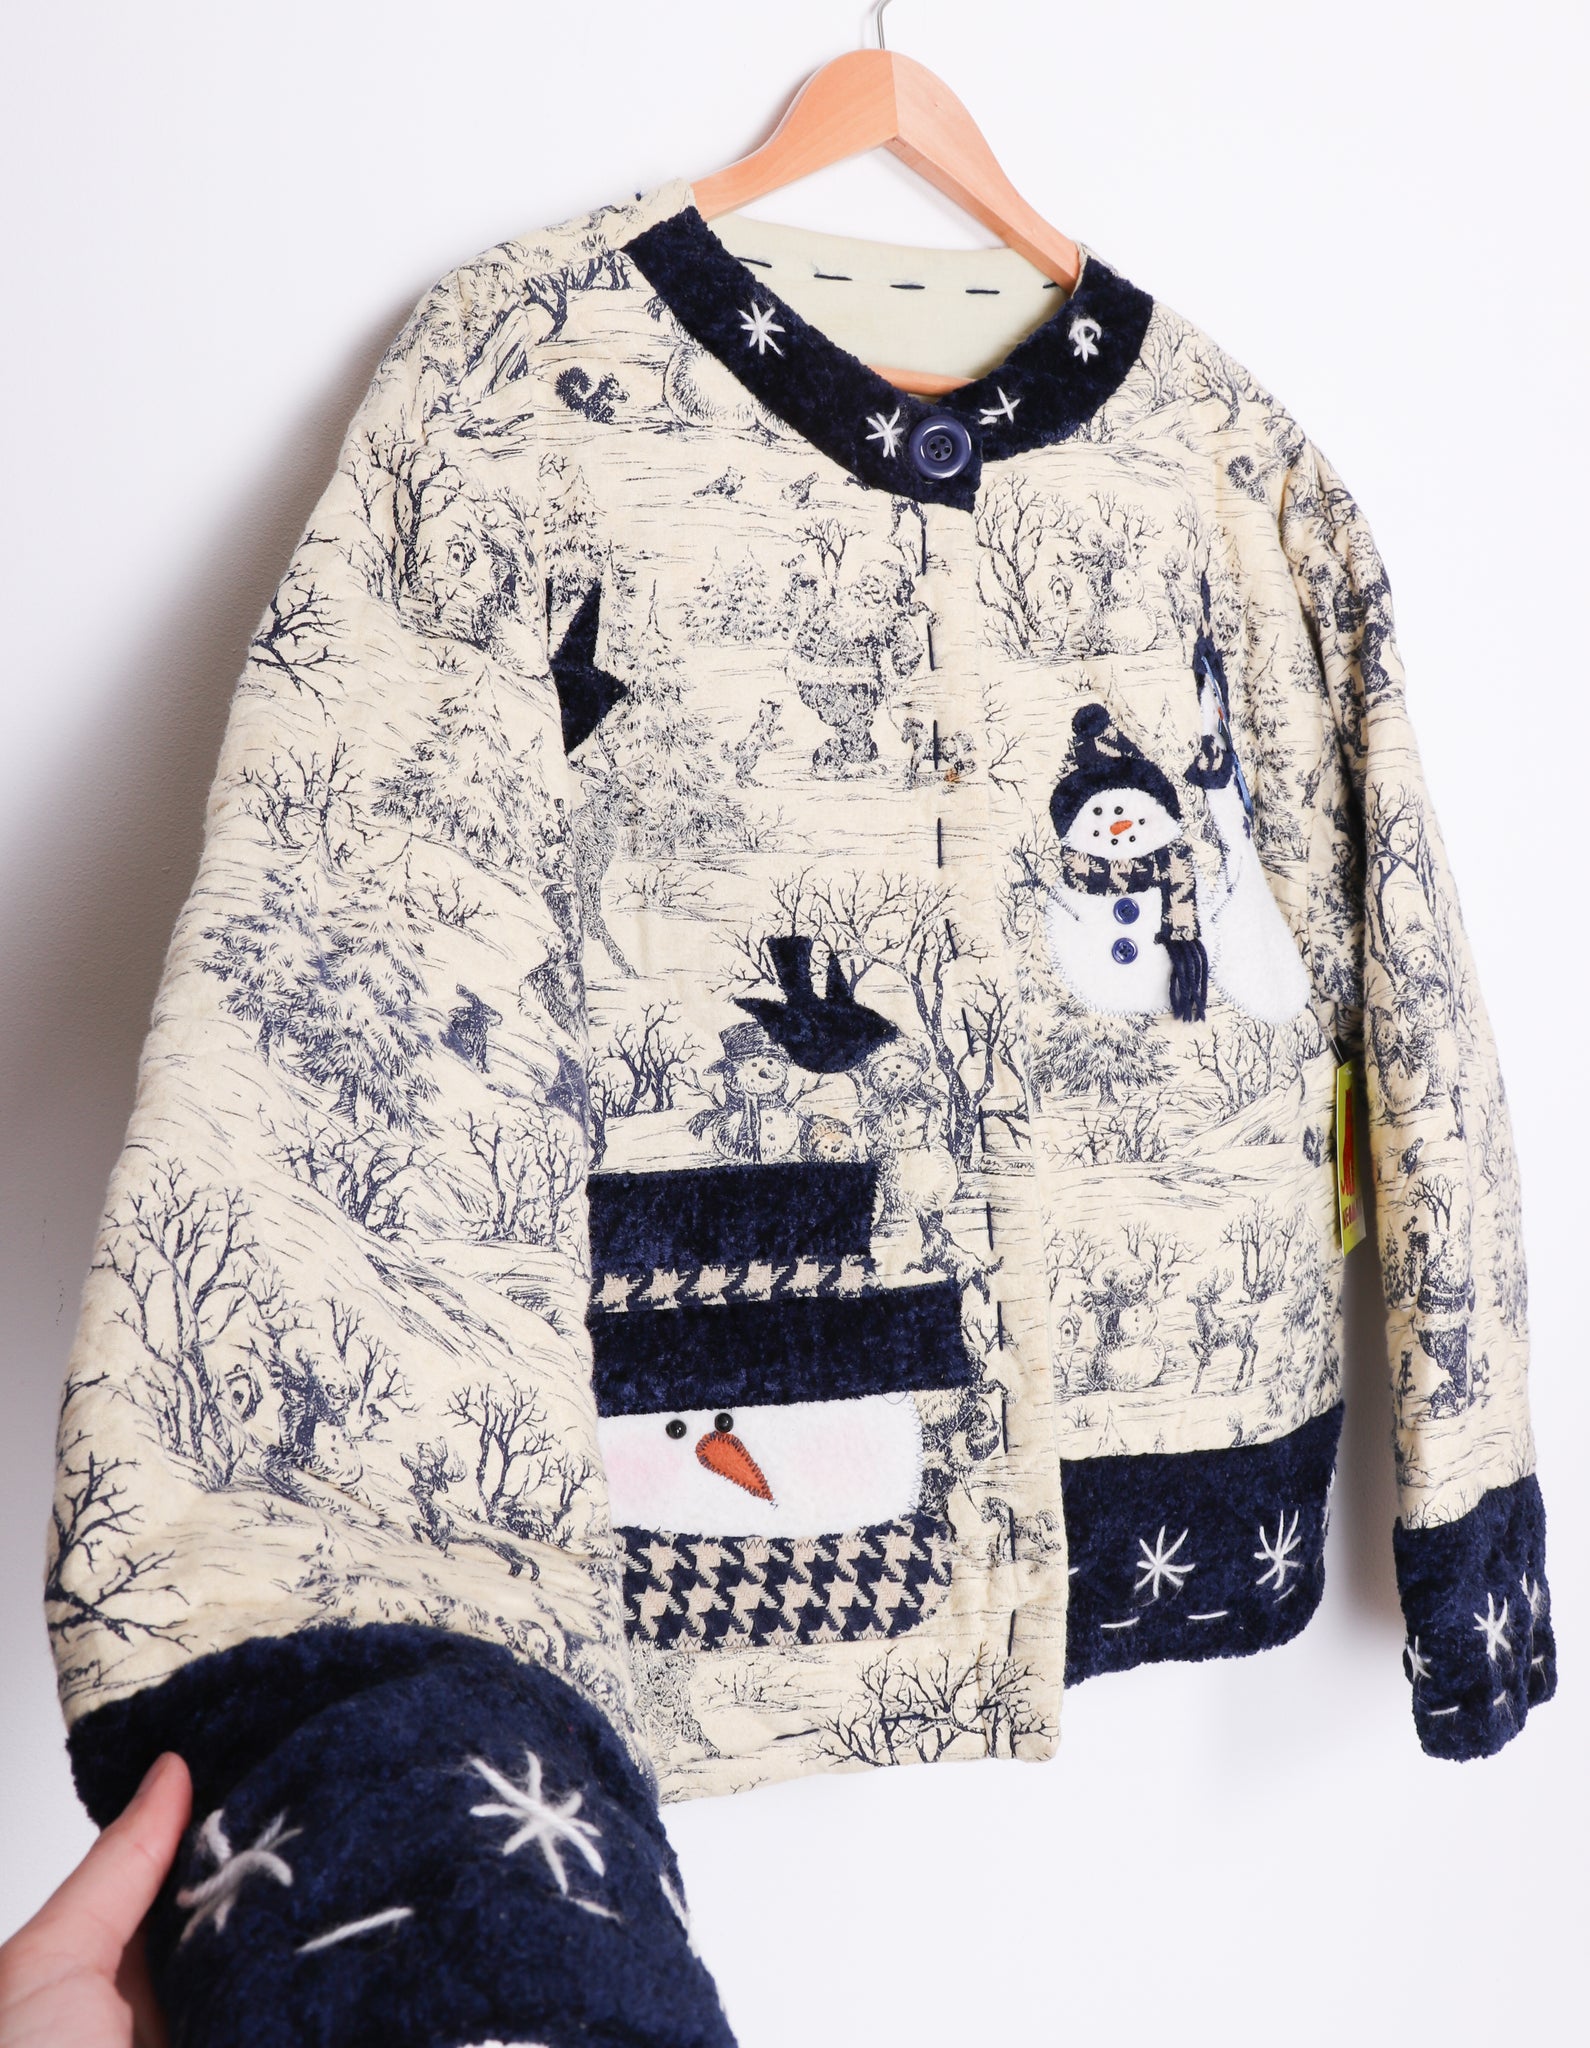 Big and Puffy Winter Scene and Snowmen Jacket